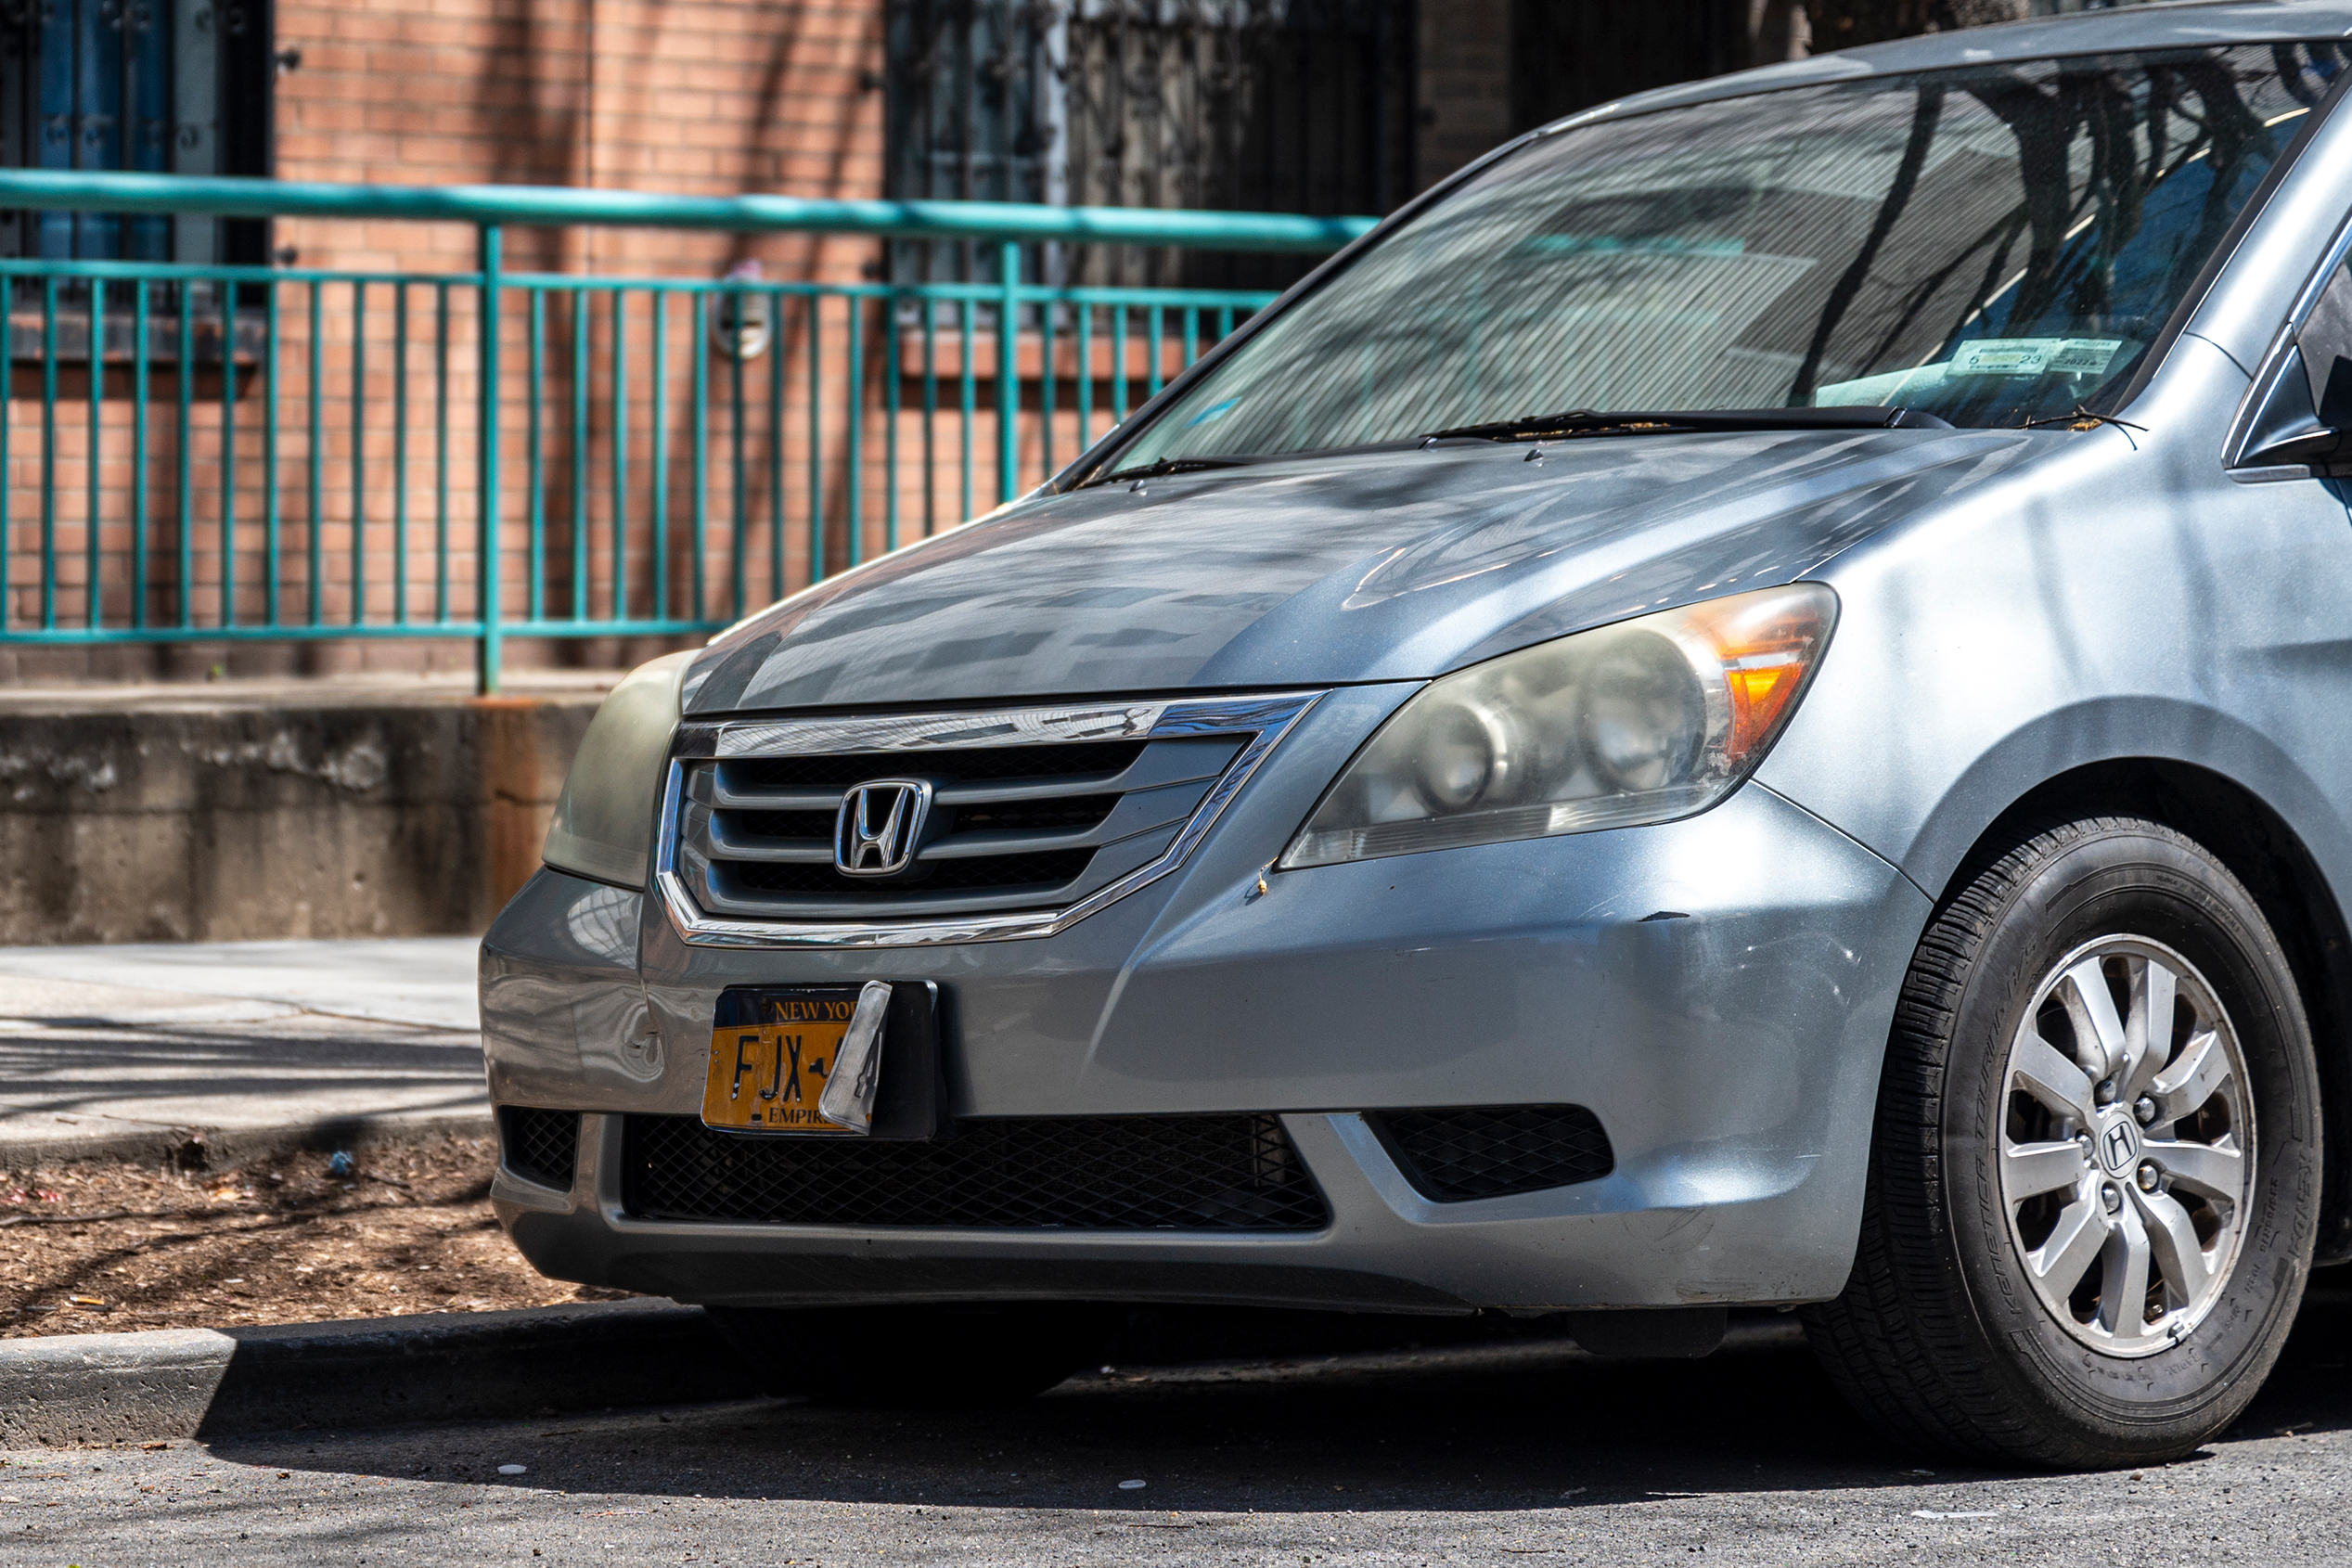 More Drivers With Bogus Plates Evading Traffic Cams, Costing NYC Up to $75M